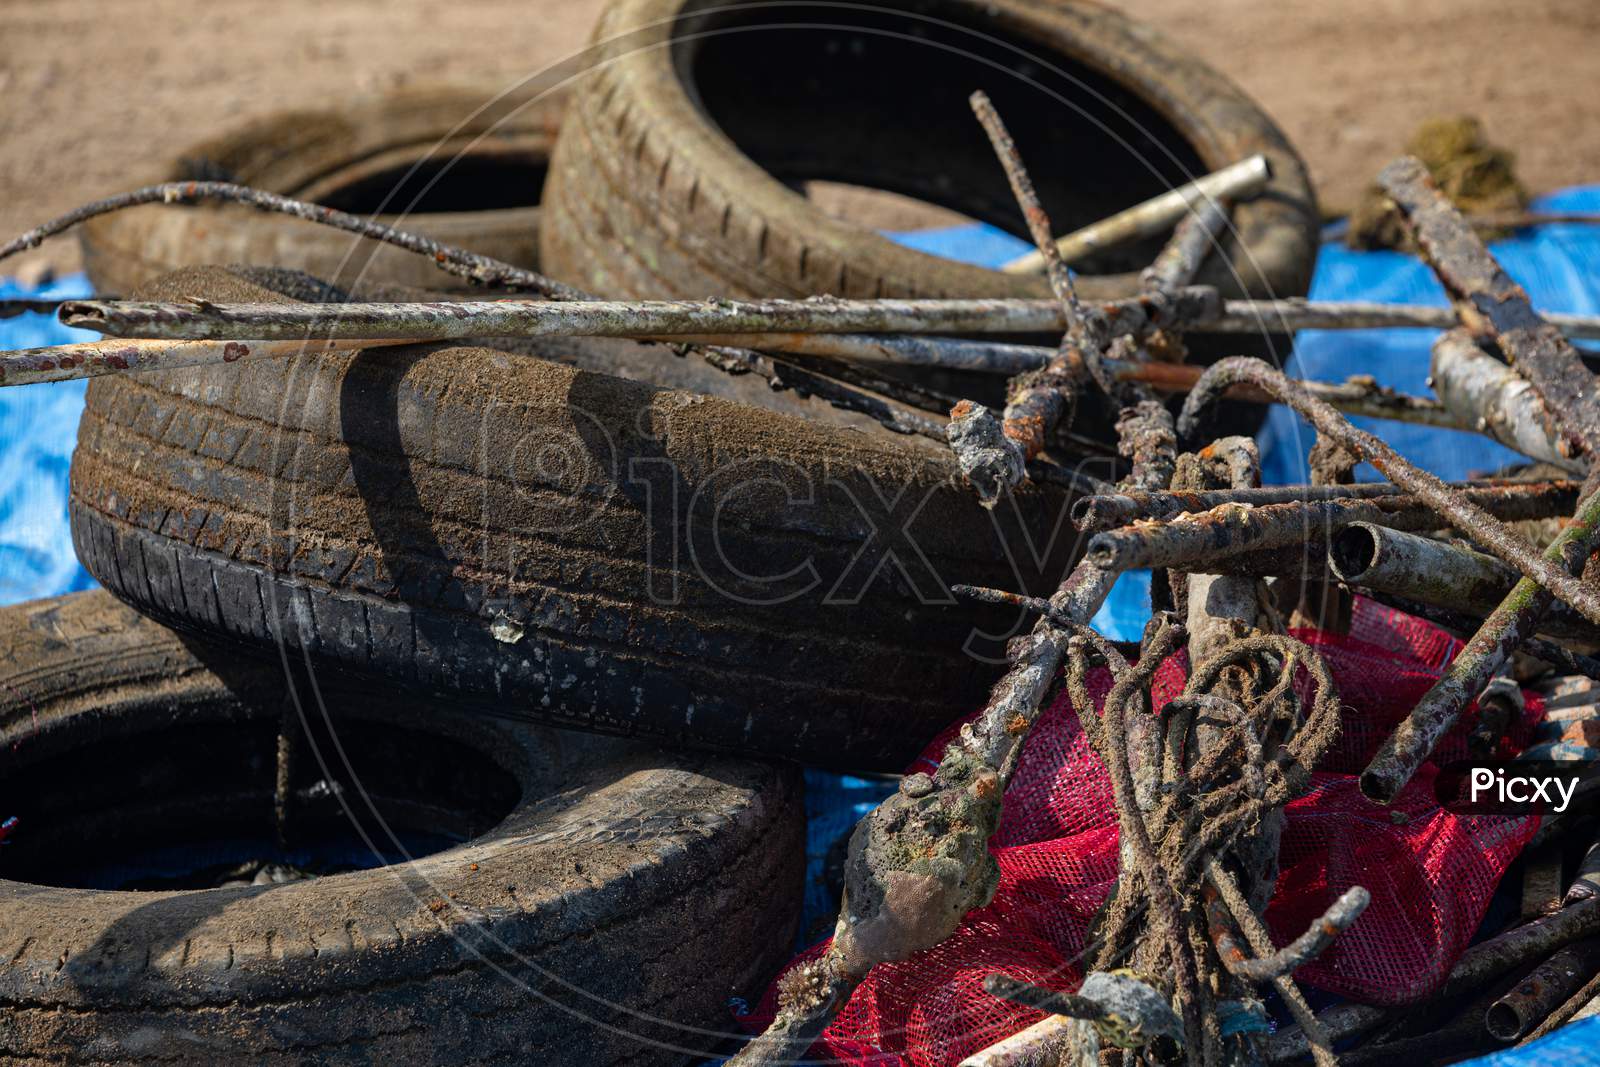 Decayed,Pipes,And,Rubber,Tires,With,Aquatic,Plants,On,It